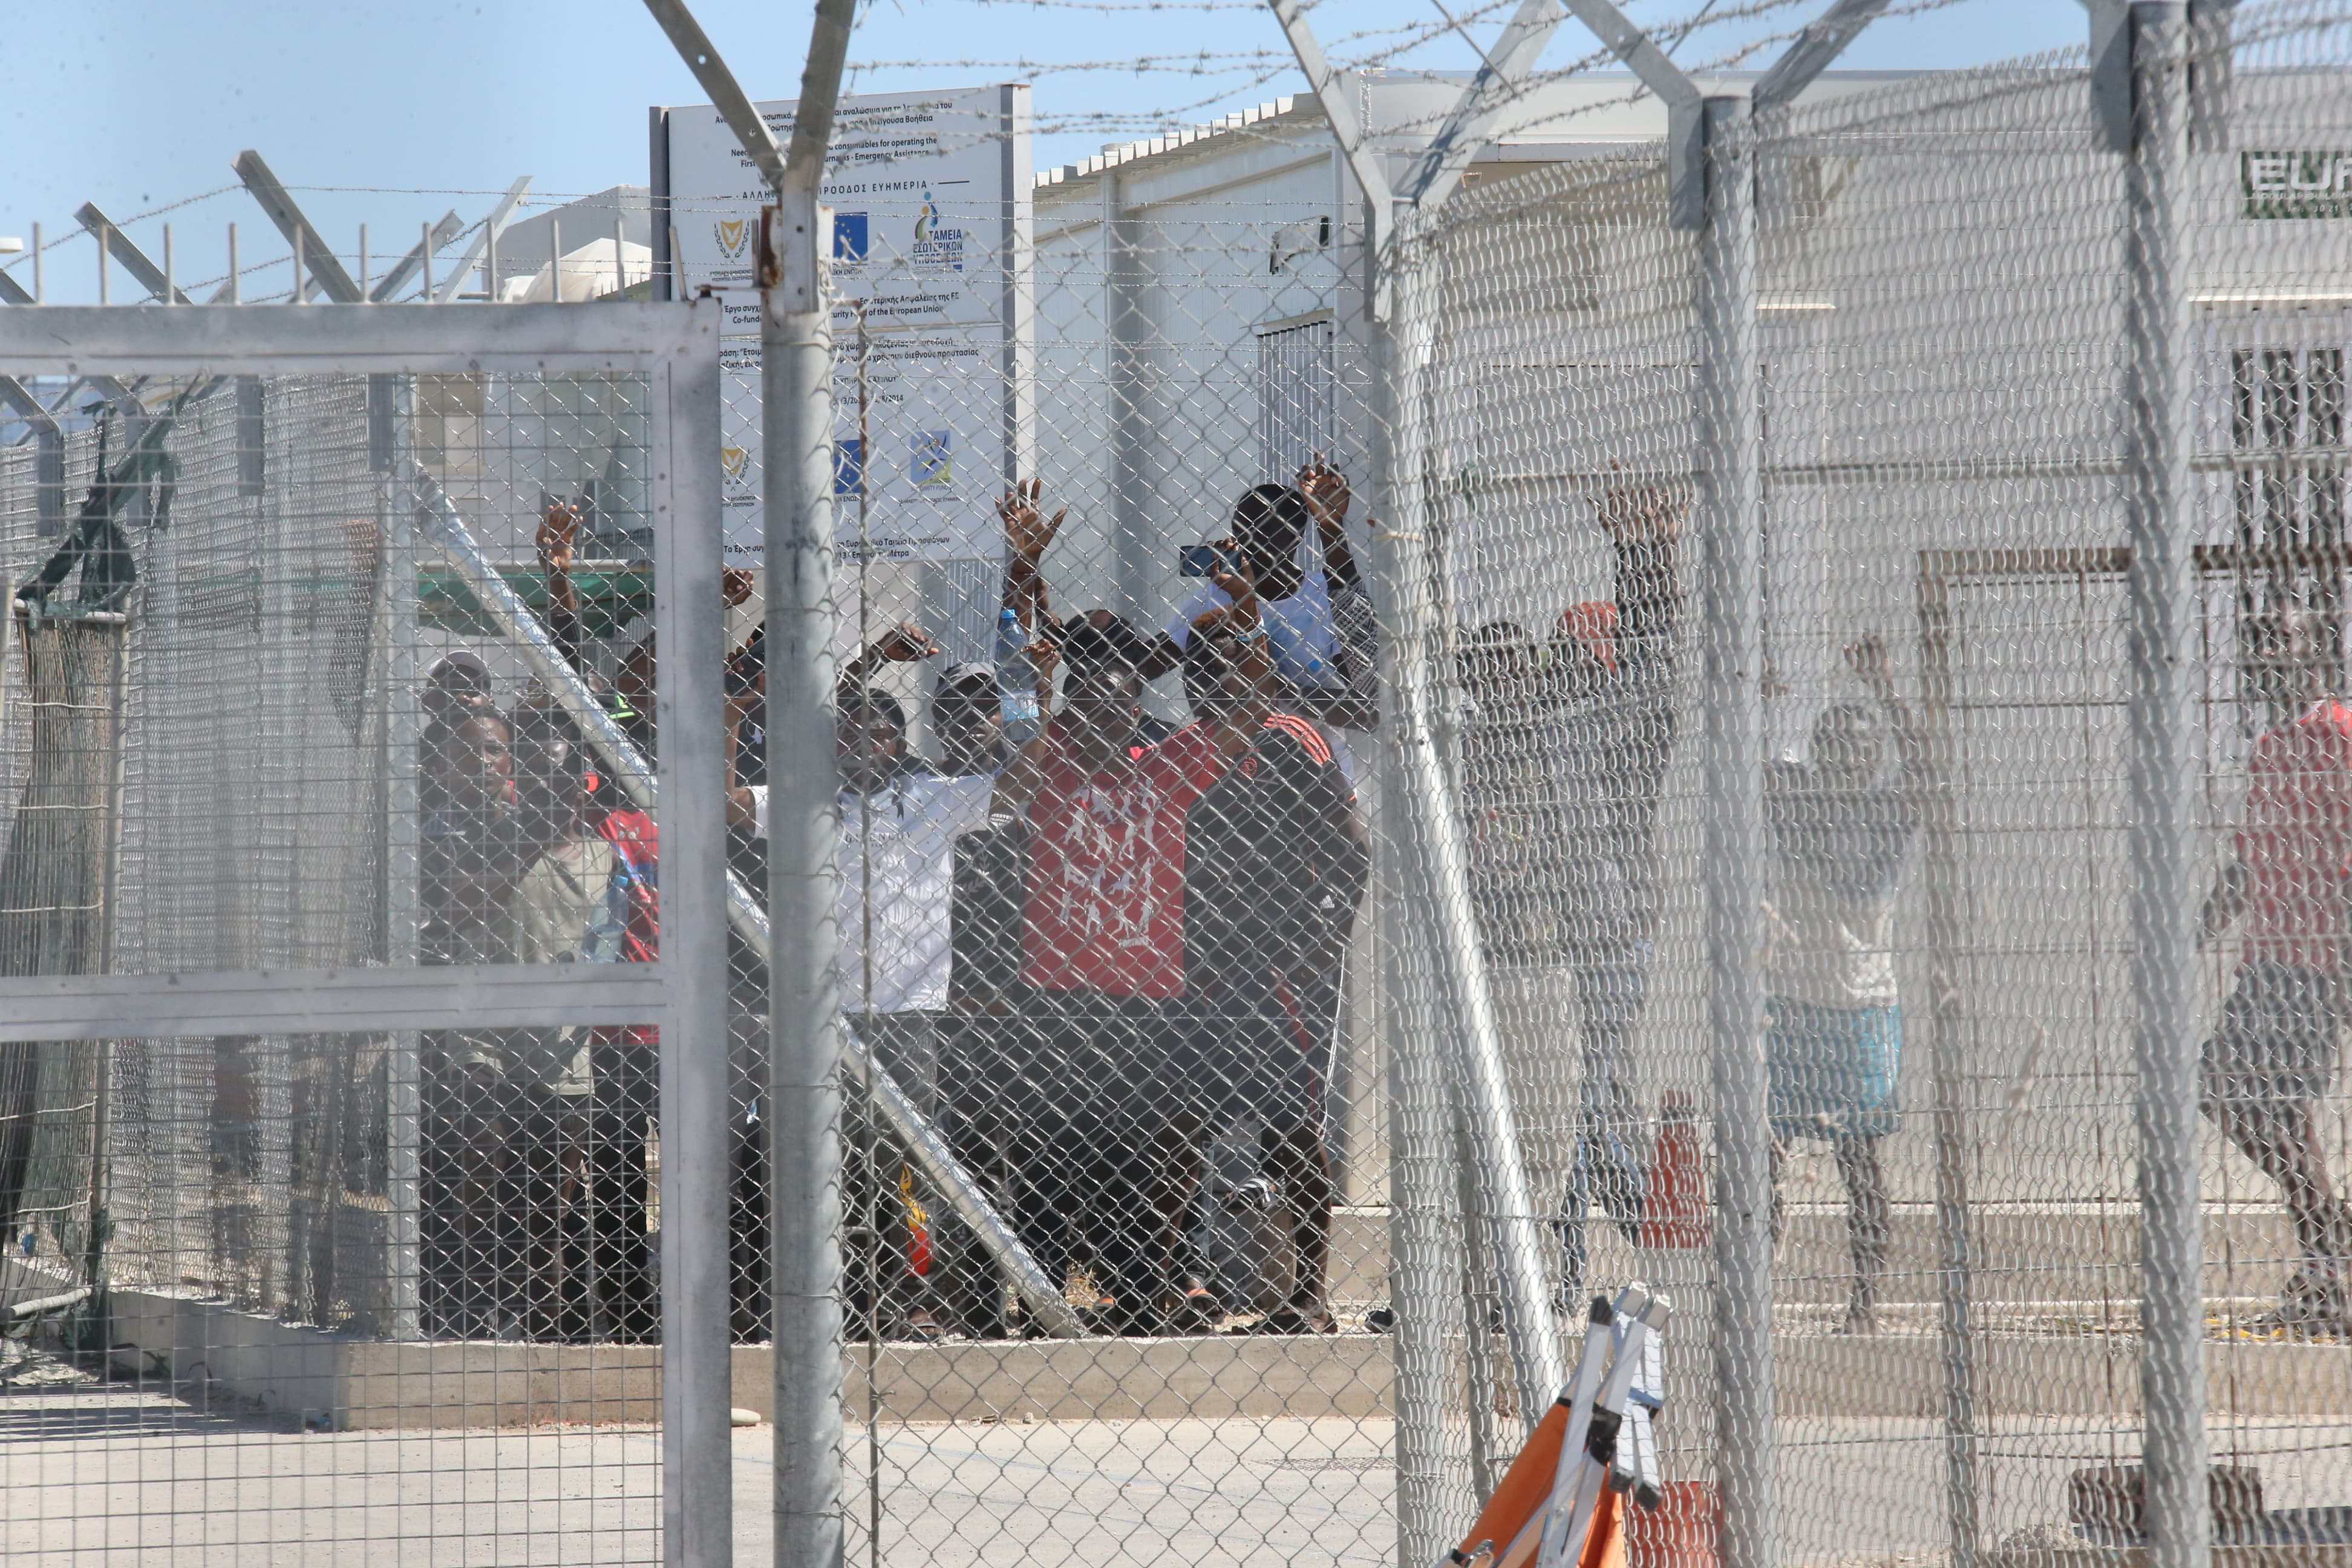 image Our View: We need speedier asylum procedures not more camps